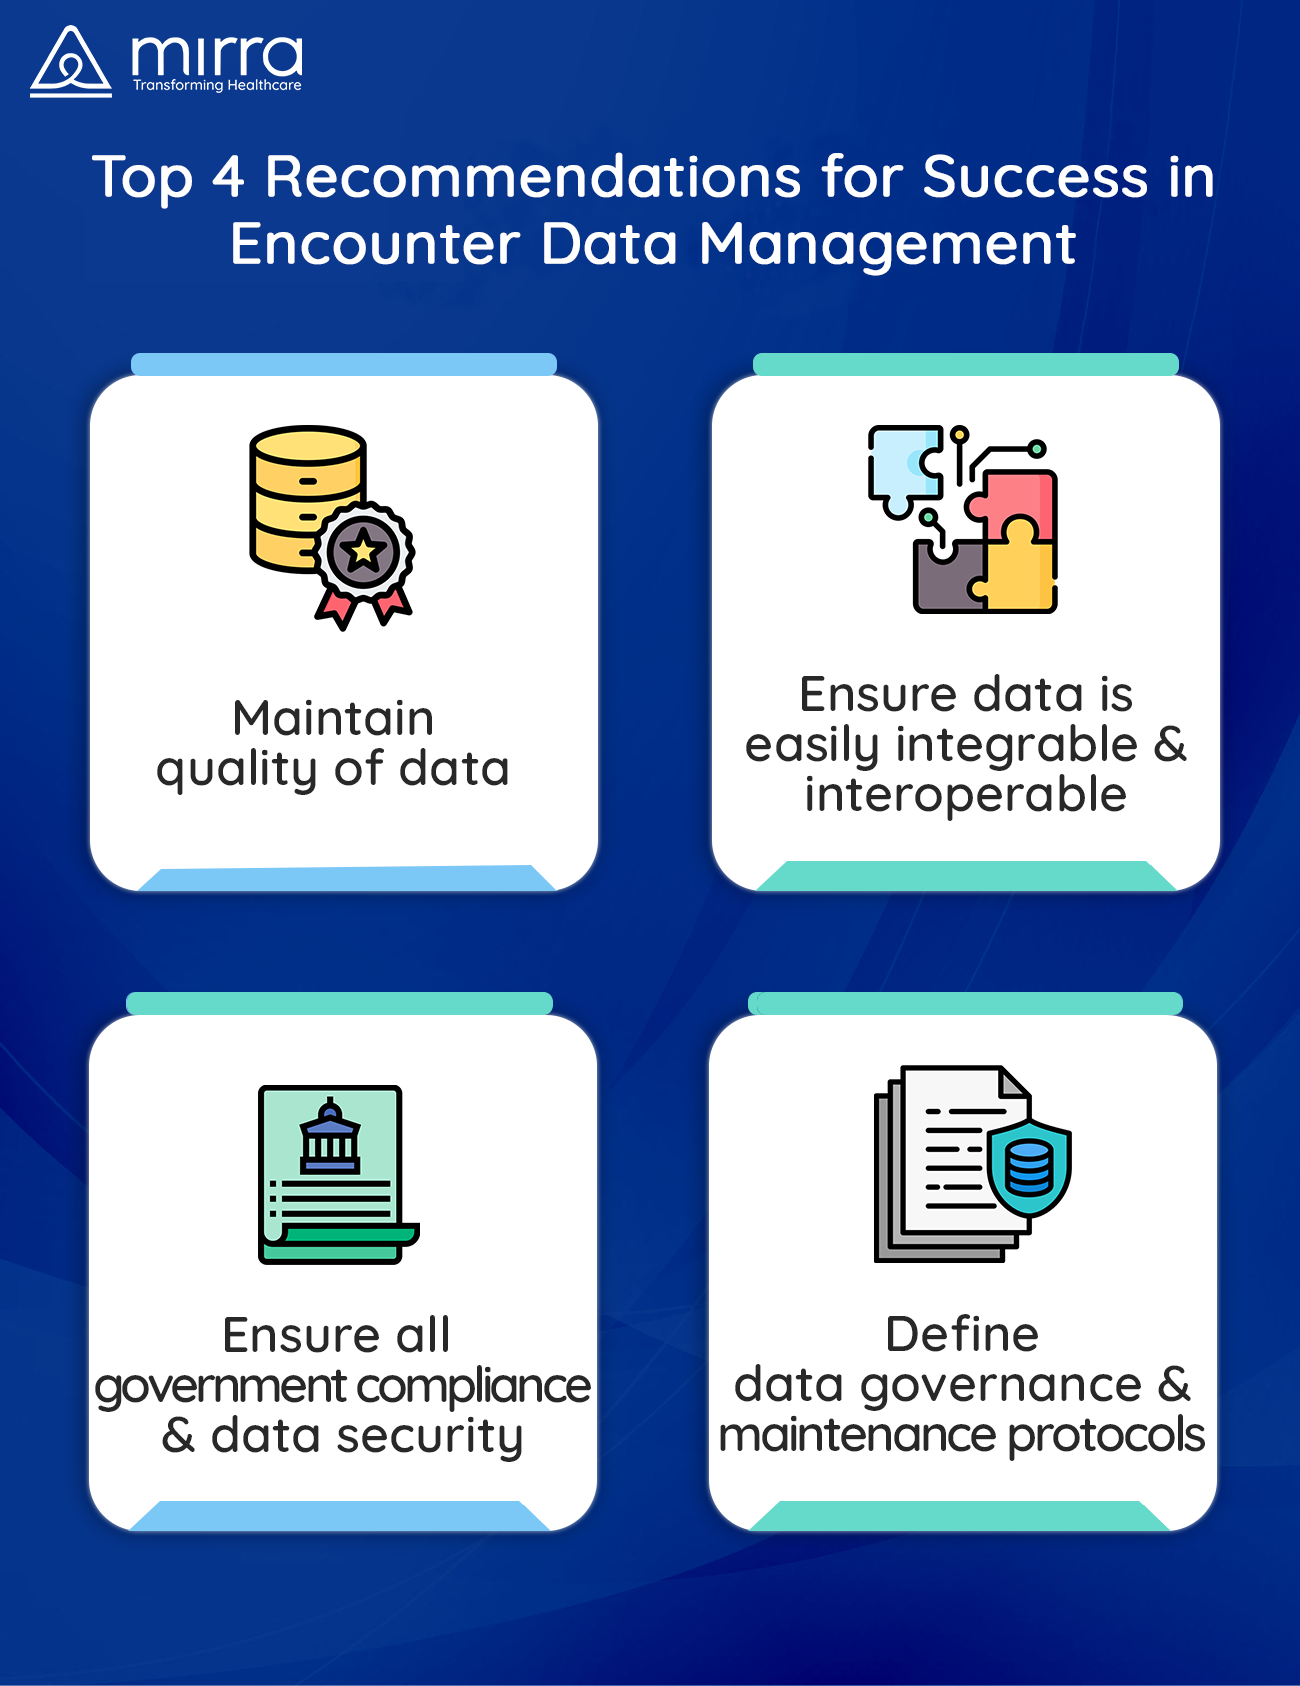 Top 4 Recommendations for Success in Customer Data Management